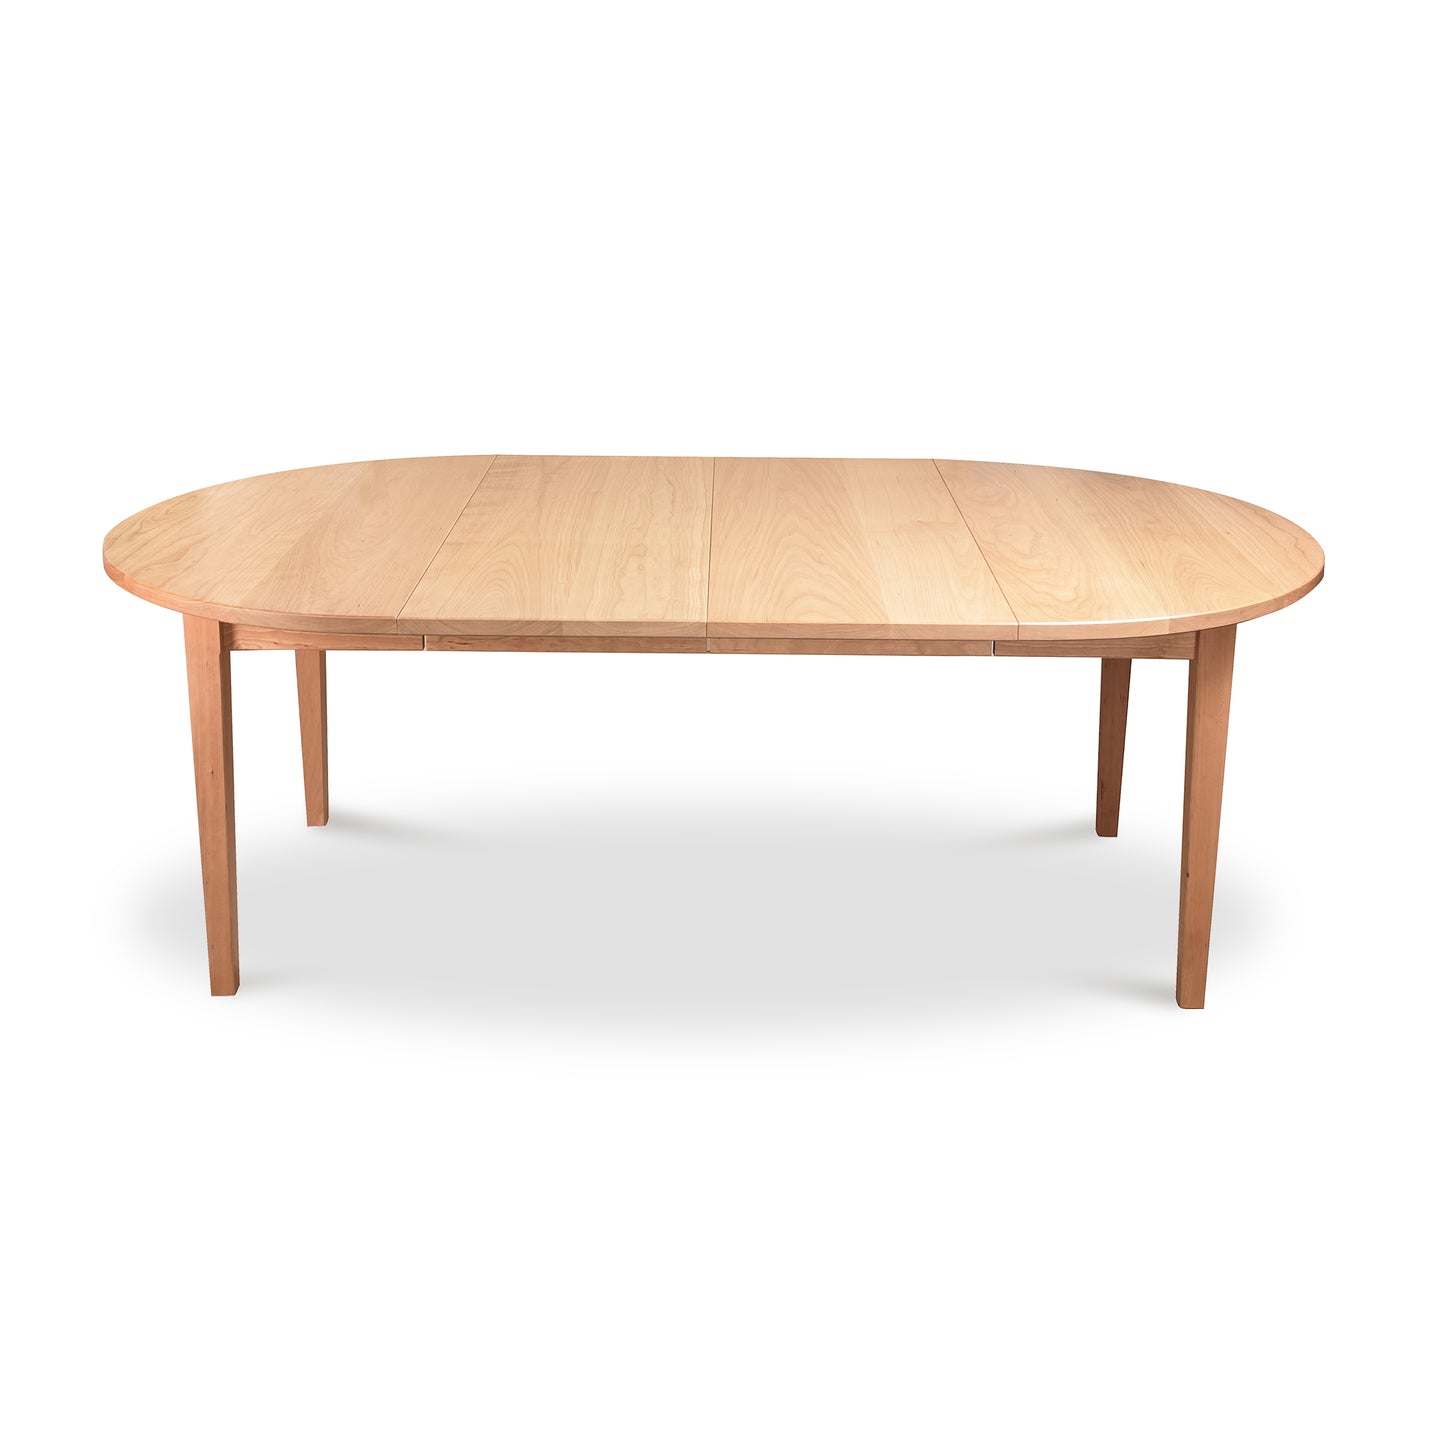 A Vermont Shaker Round Extension Table from Maple Corner Woodworks, made of natural cherry wood with an extendable center section, and standing on four slender legs, isolated against a white background.